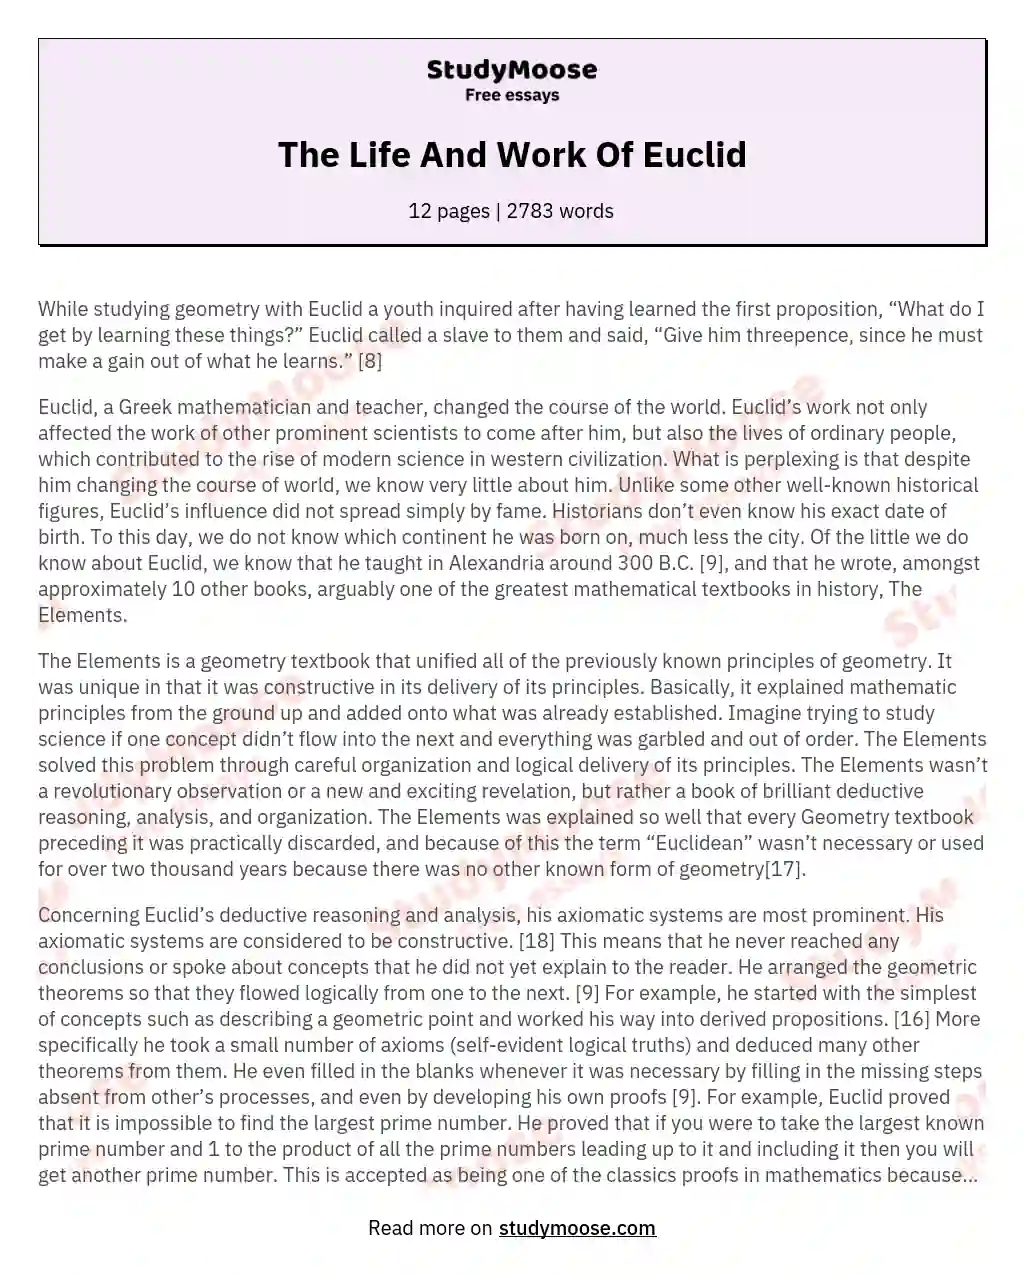 The Life And Work Of Euclid